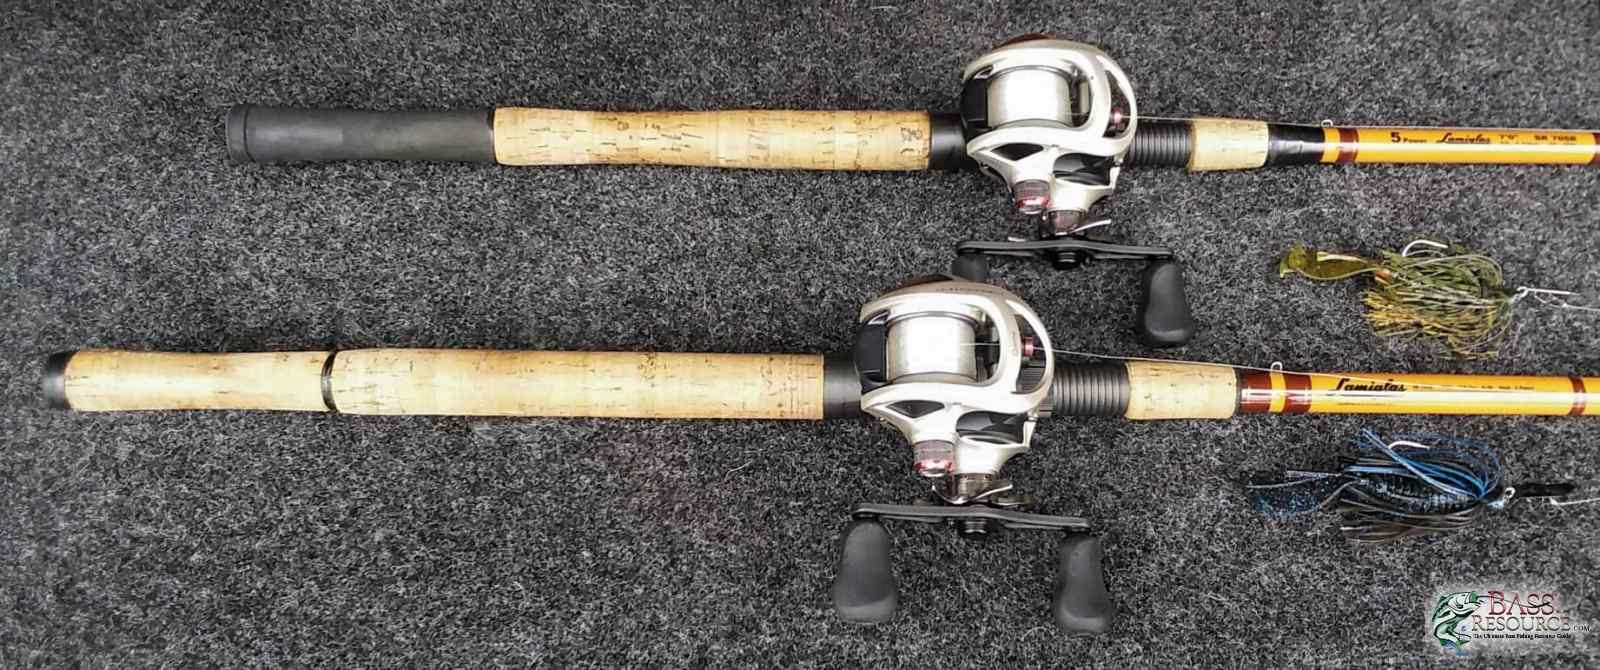 Dedicated Chatterbait Rod - Fishing Rods, Reels, Line, and Knots - Bass  Fishing Forums